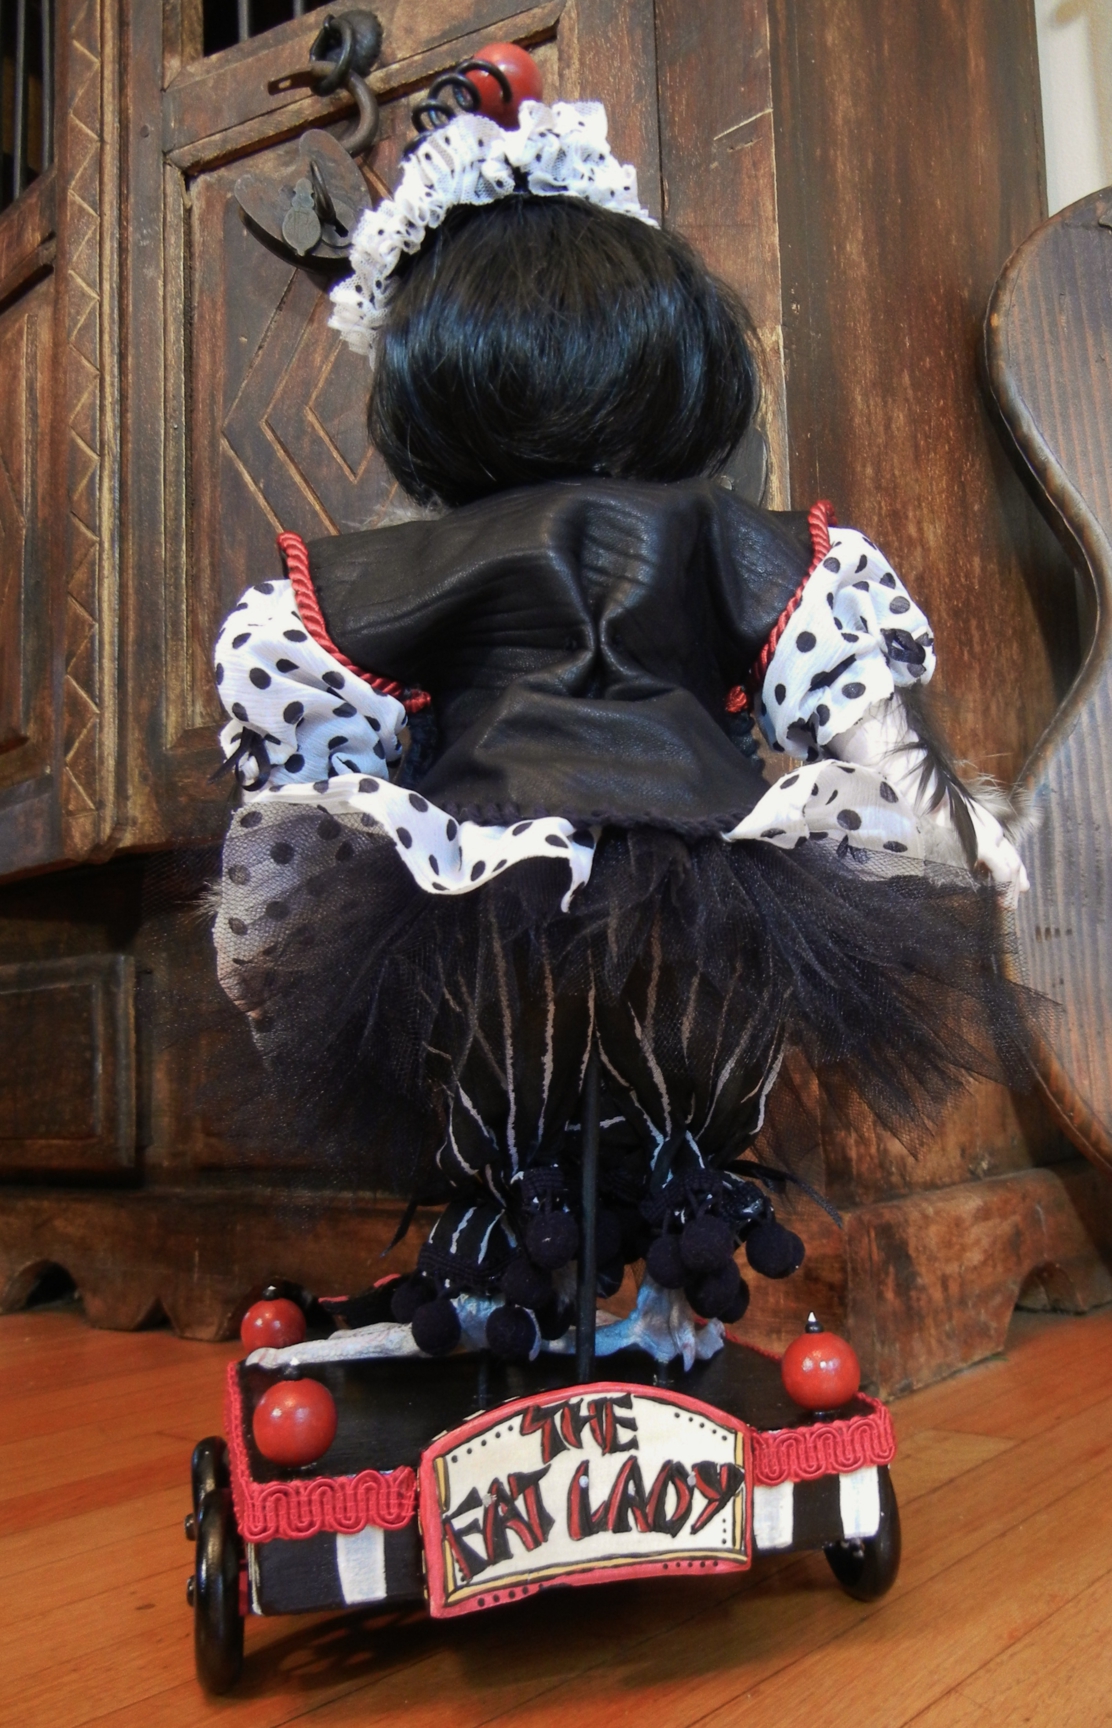 Asian Chinese girl doll with black bob wearing black and white polka-dot dress has feathers and taxidermy bird webbed duck feet standing on hand-painted wooden circus cart